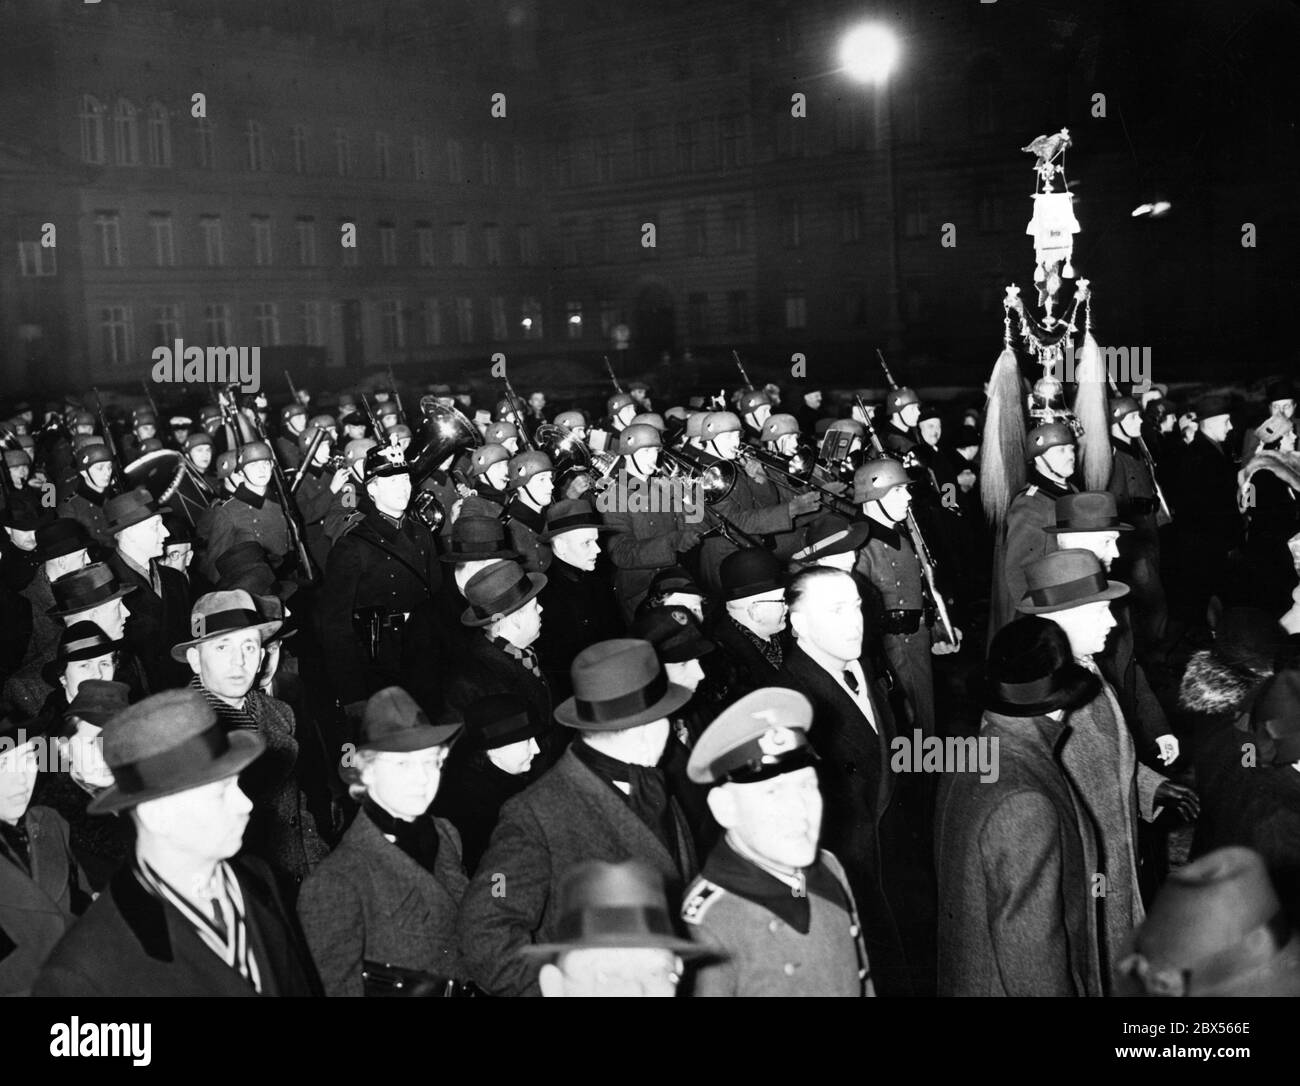 The music corps of the Guard Regiment at the traditional Neujahrswecken (New Year's event) of the Wehrmacht on the boulevard Unter den Linden in Berlin. Stock Photo